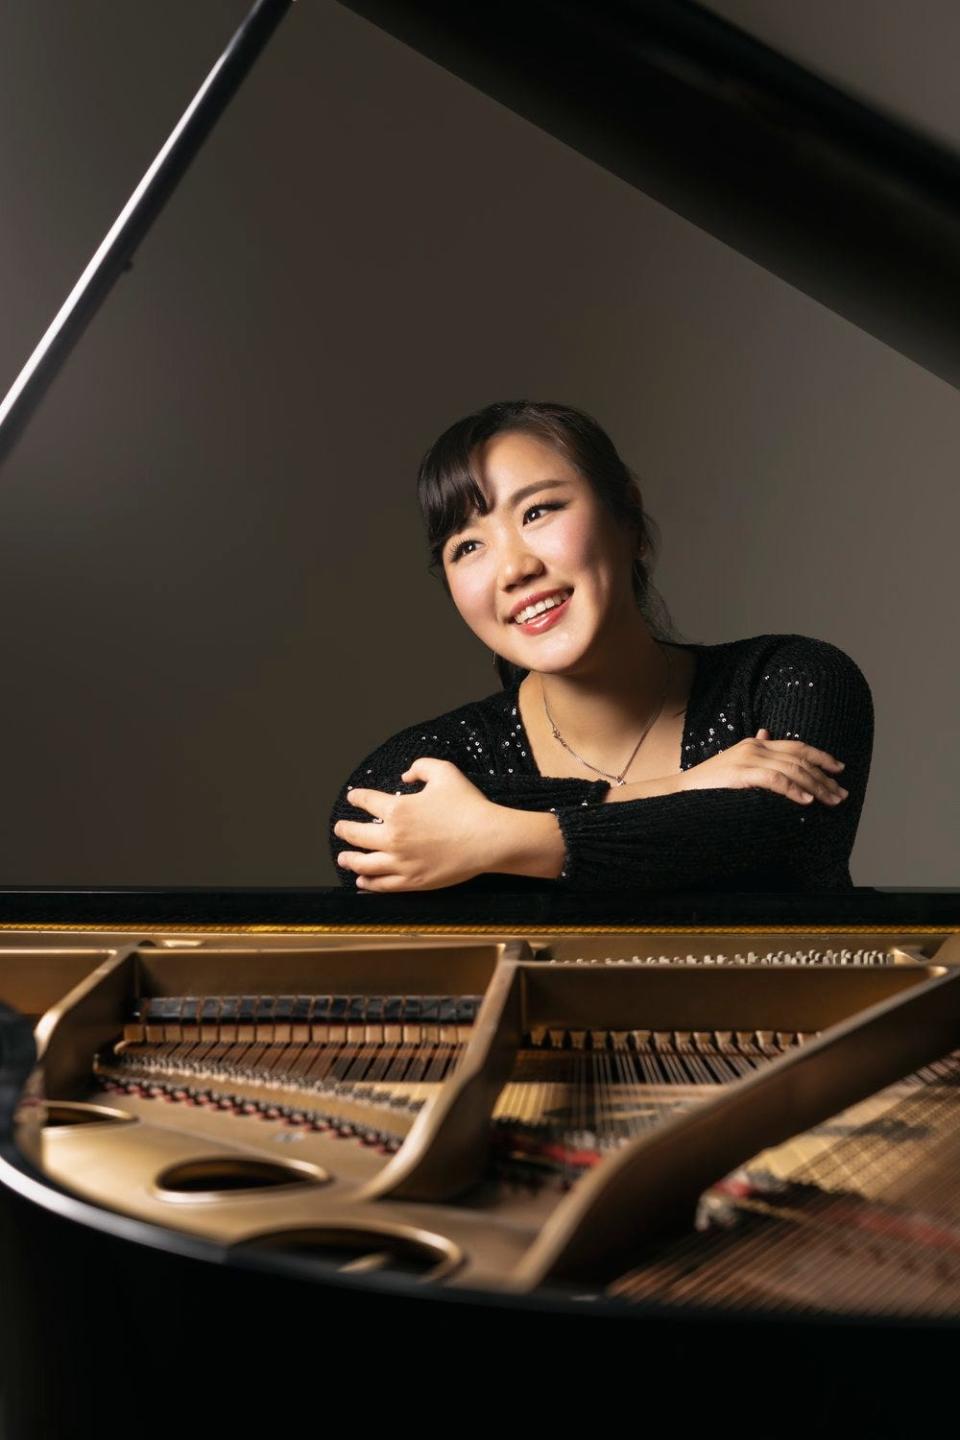 Sun-A Park will be performing a selection of piano works originally written for piano but later orchestrated by Maurice Ravel (1875-1937) and Modest Mussorgsky’s (1839-1881) “Pictures at an Exhibition.”